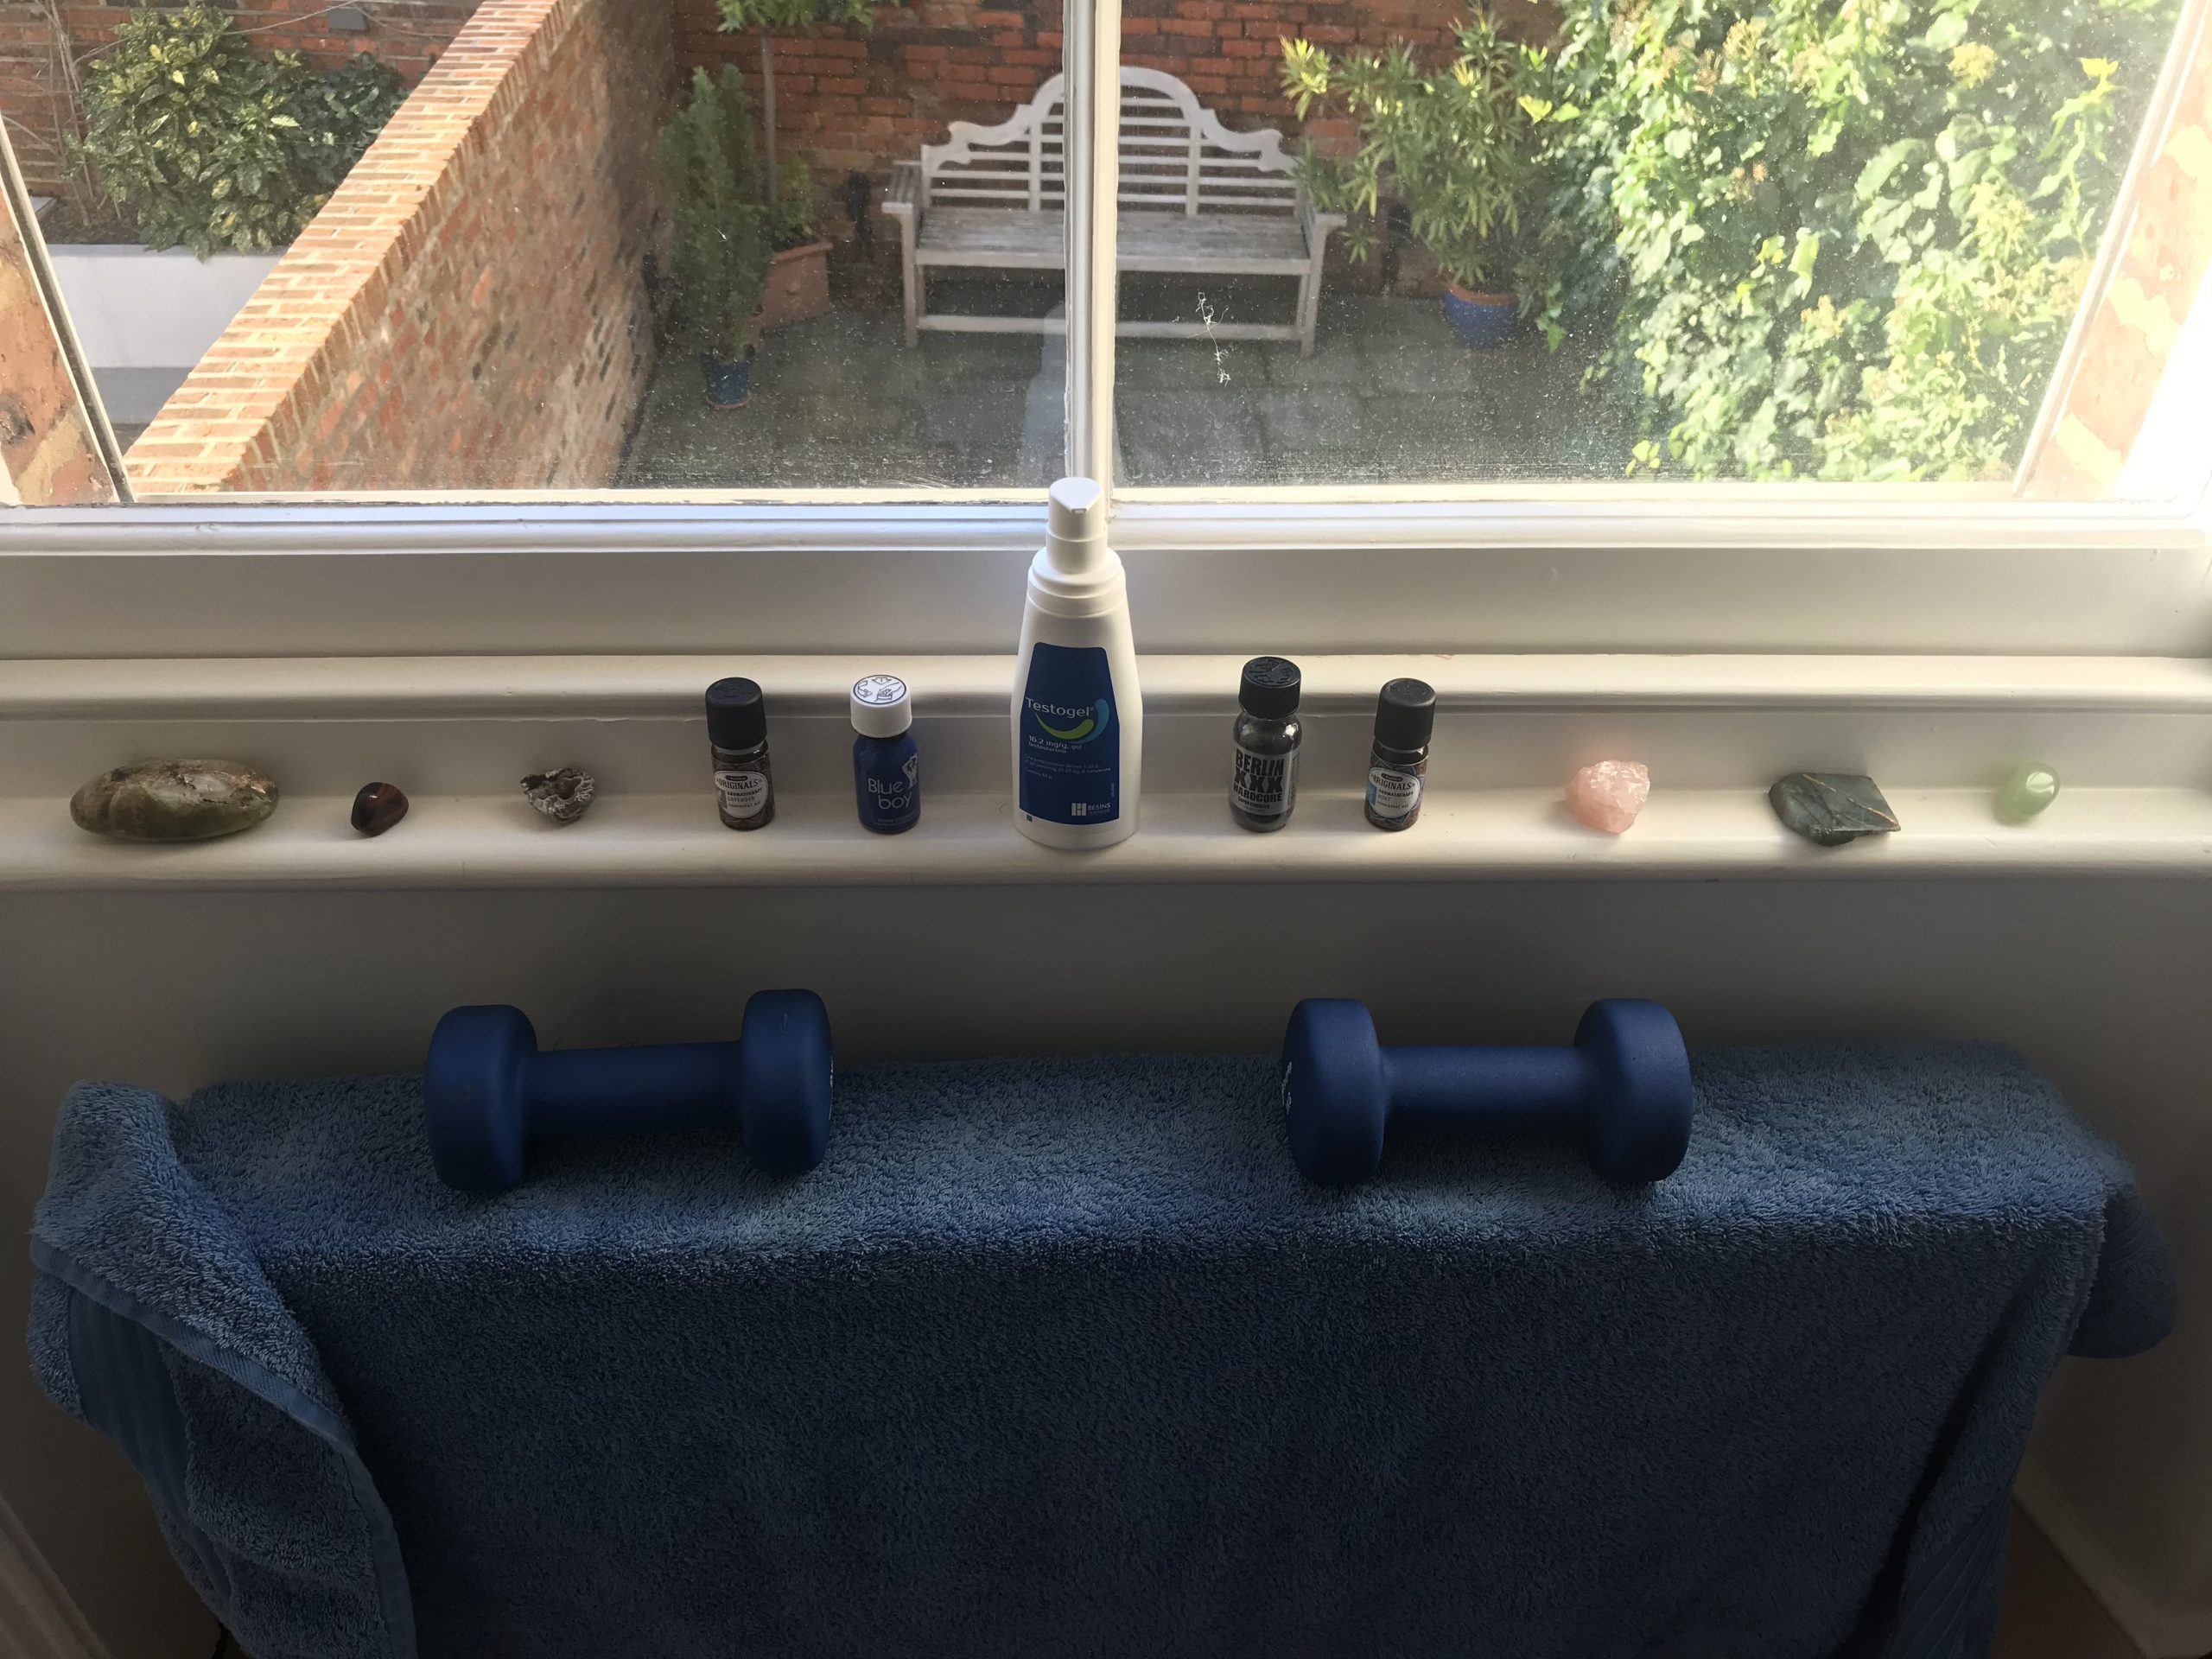 An alter: a bottle of testogel on a thin window ledge with either side of it various small bottles and crystals. Below is a blue towel on a radiator, weighted down by two blue free weights. The image is sunny, and out the window at the top you can see a terrace garden below with a wooden bench and some greenery.